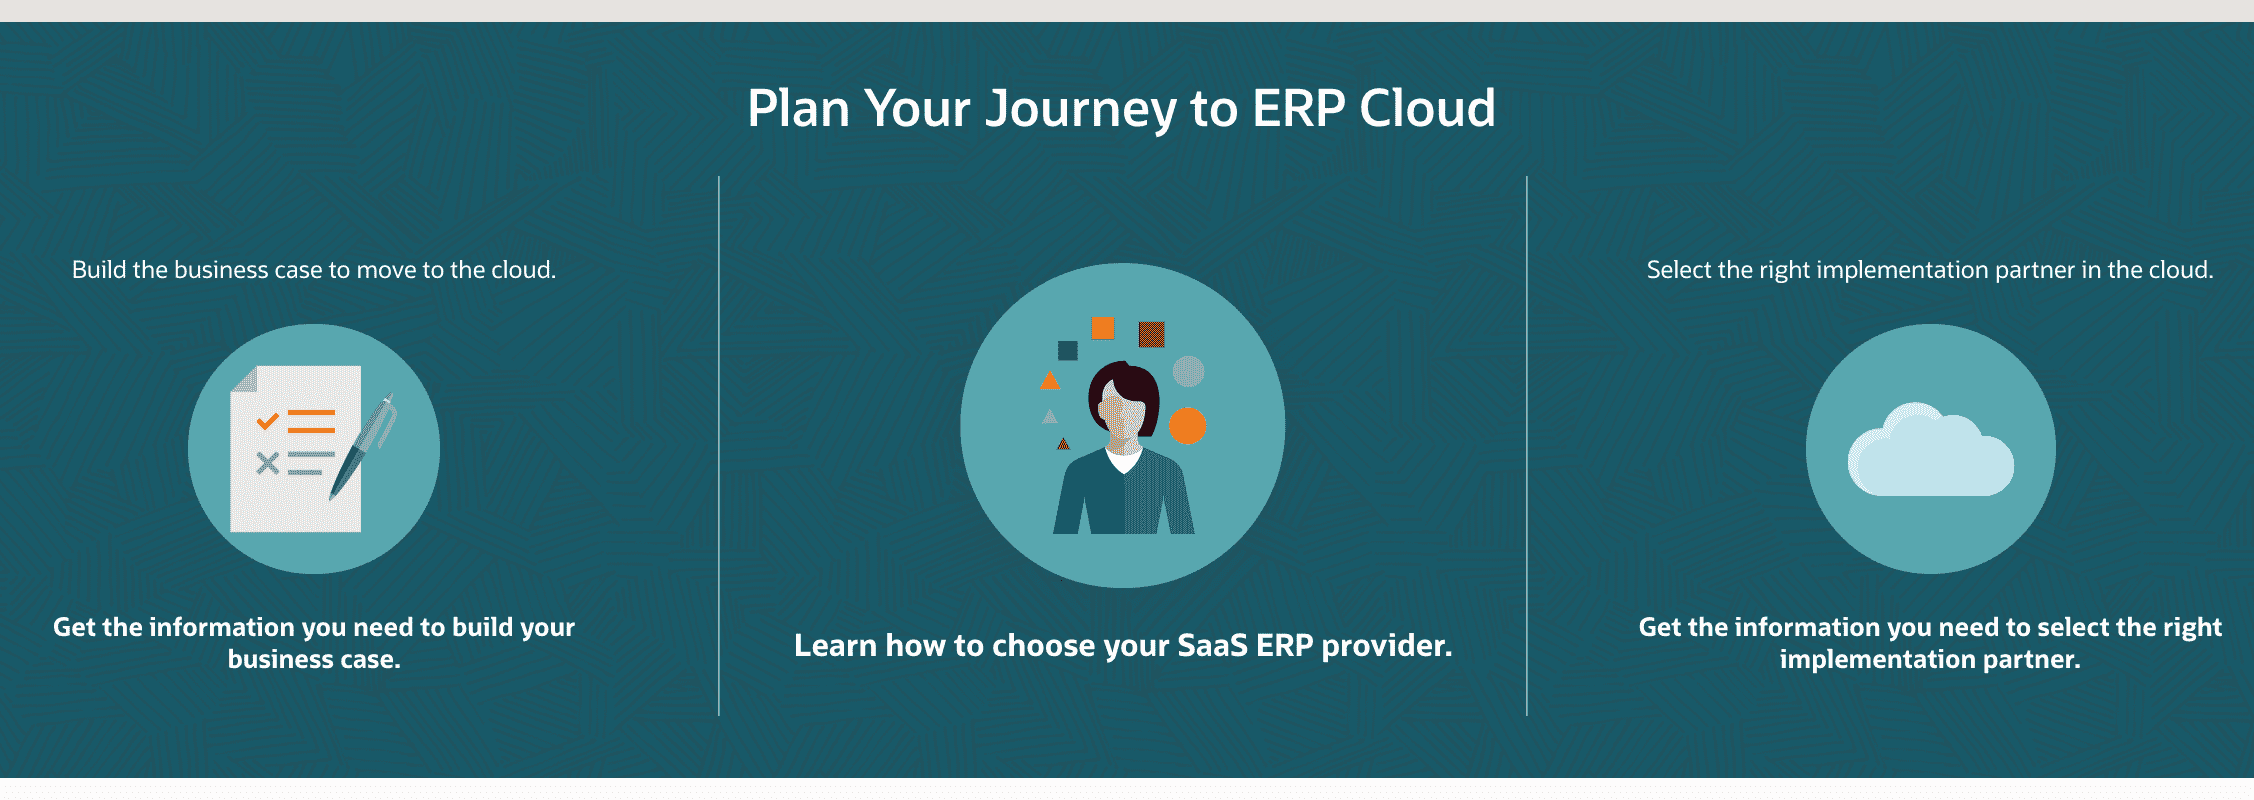 Oracle ERP Cloud helps you streamline your procedures. You get a wide range of analytics, integration, and security tools.